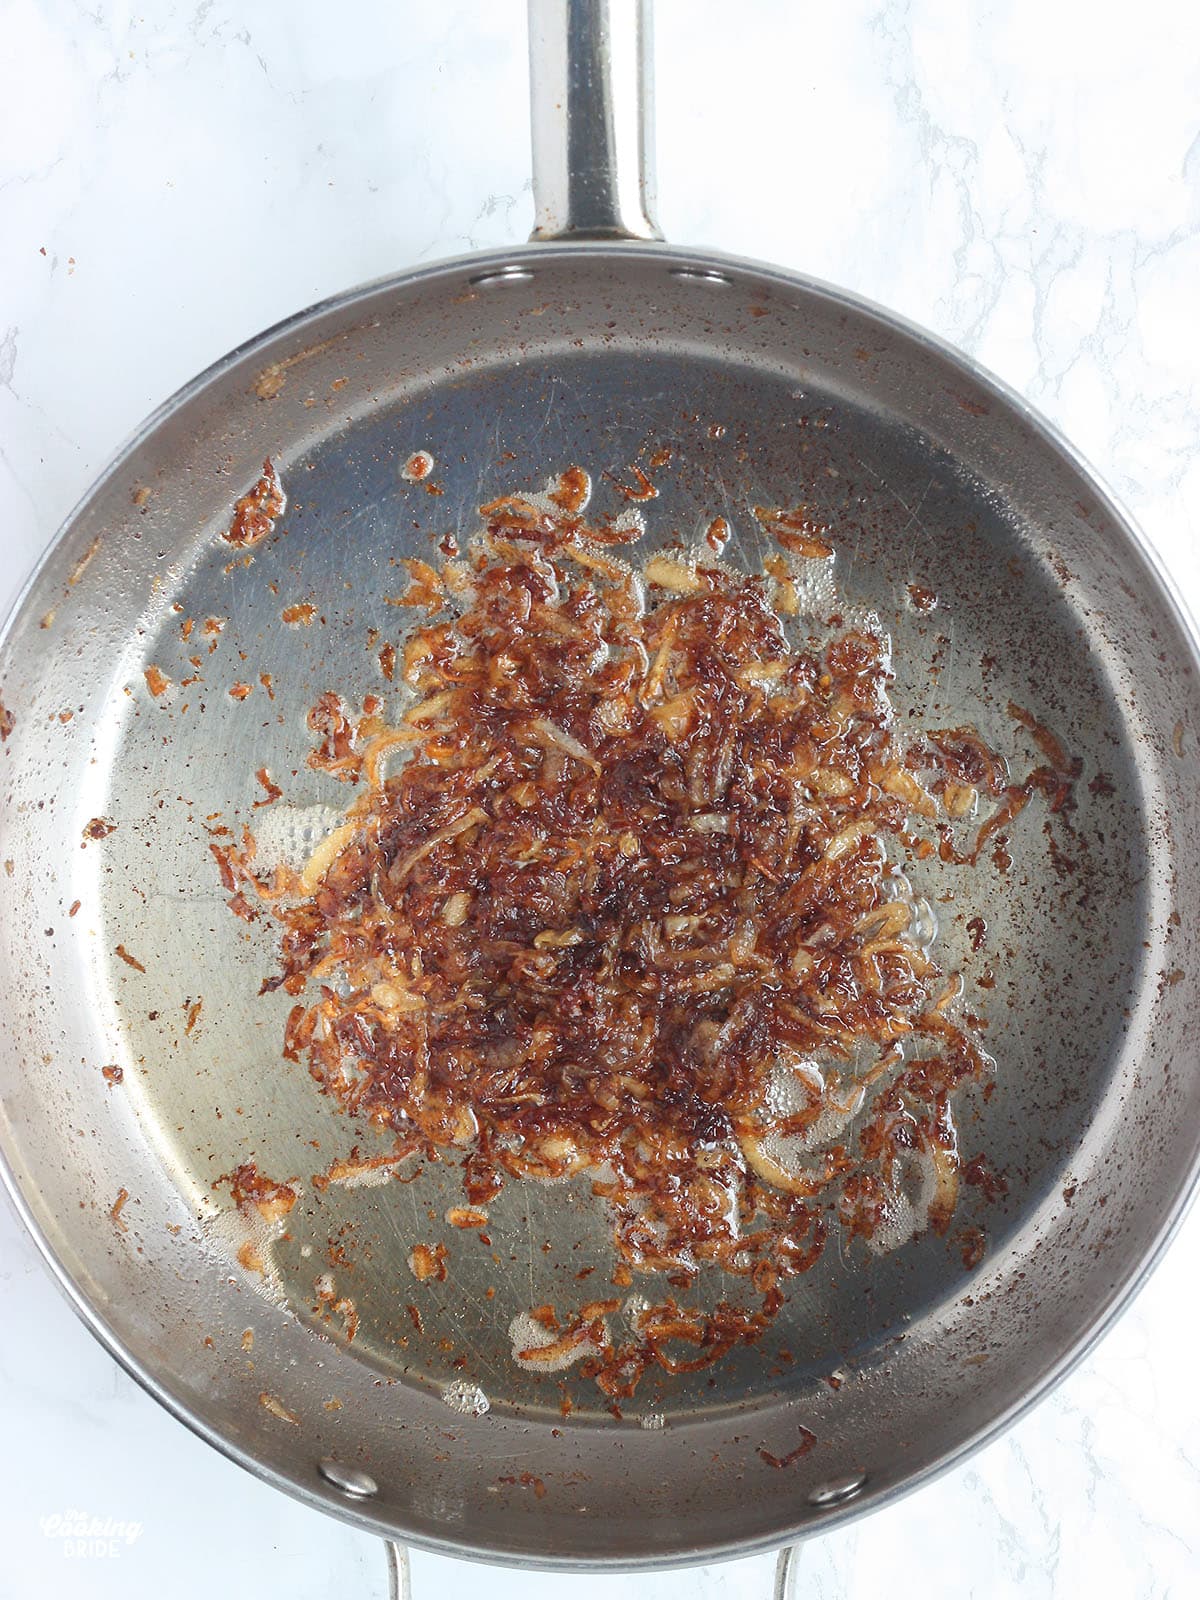 caramelized onions in a stainless steel skillet